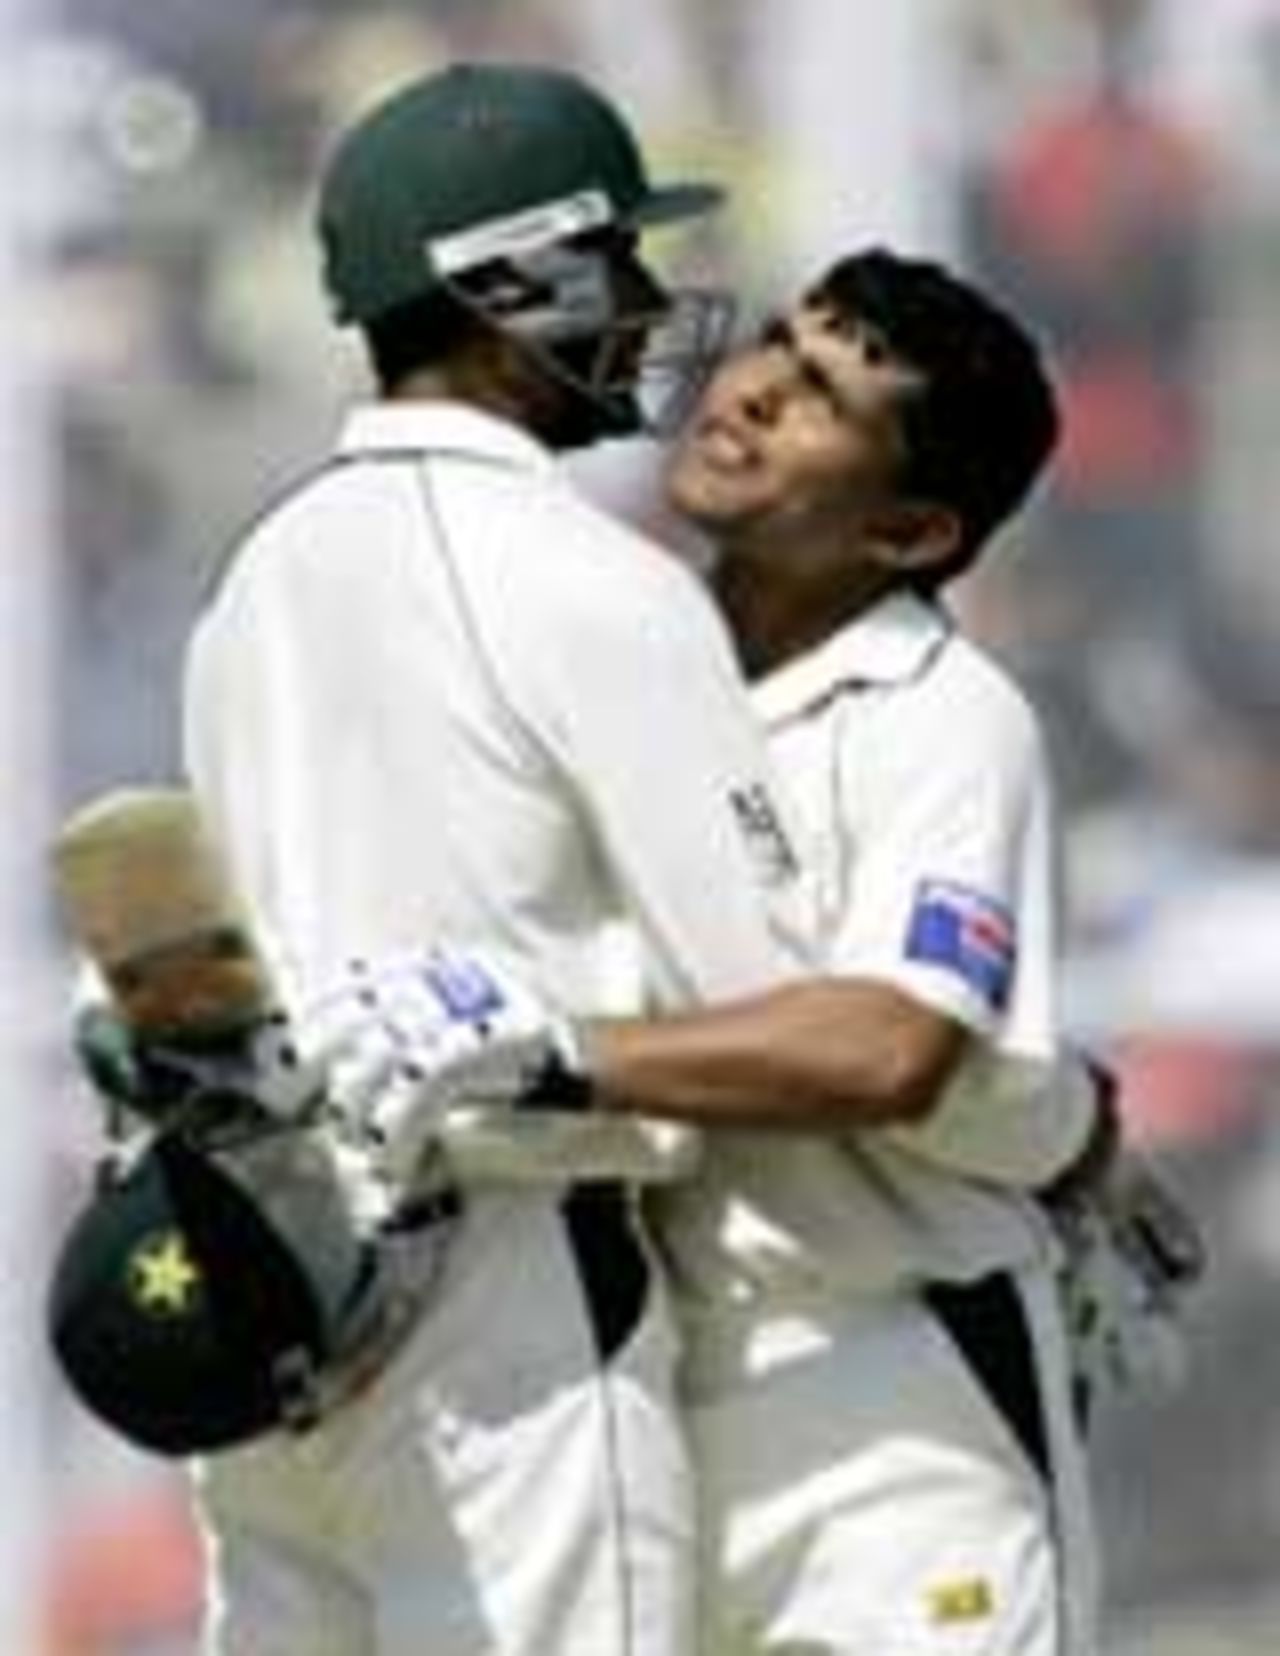 Kamran Akmal and Abdul Razzaq saved the Test for Pakistan, India v Pakistan, 1st Test, Mohali, 5th day, March 12, 2005